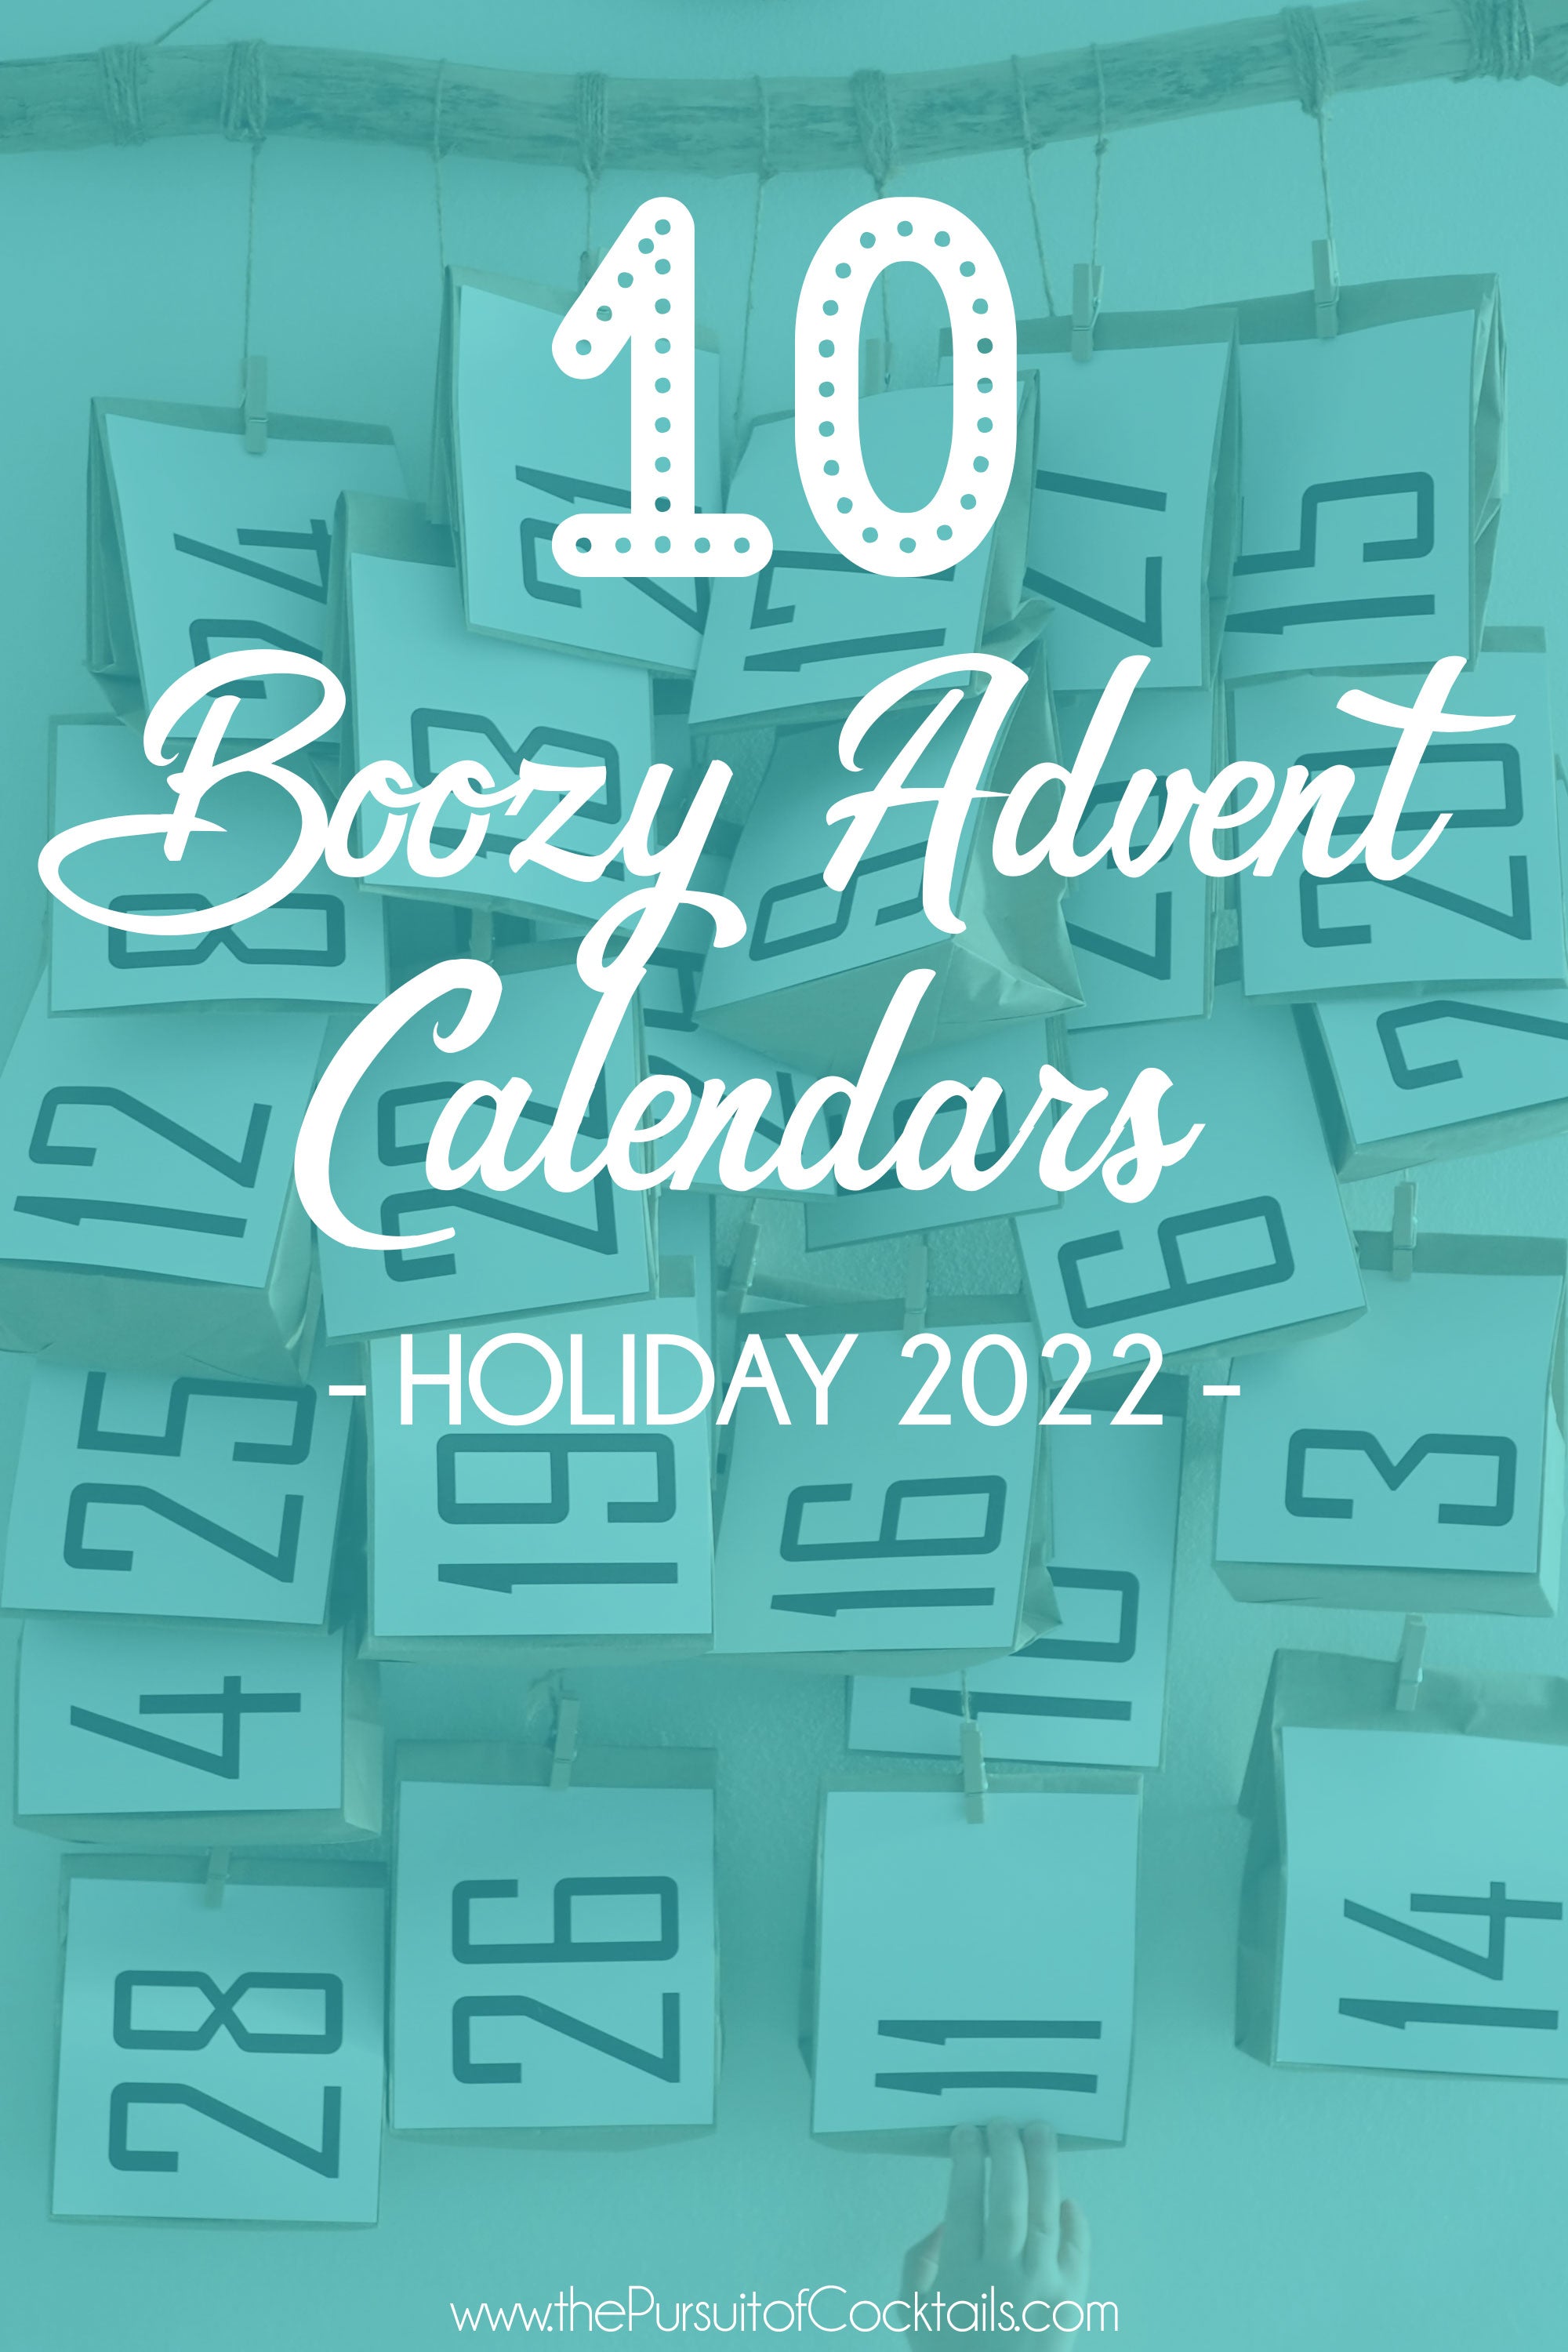 A Drinker's Guide to the Best Boozy Advent Calendars